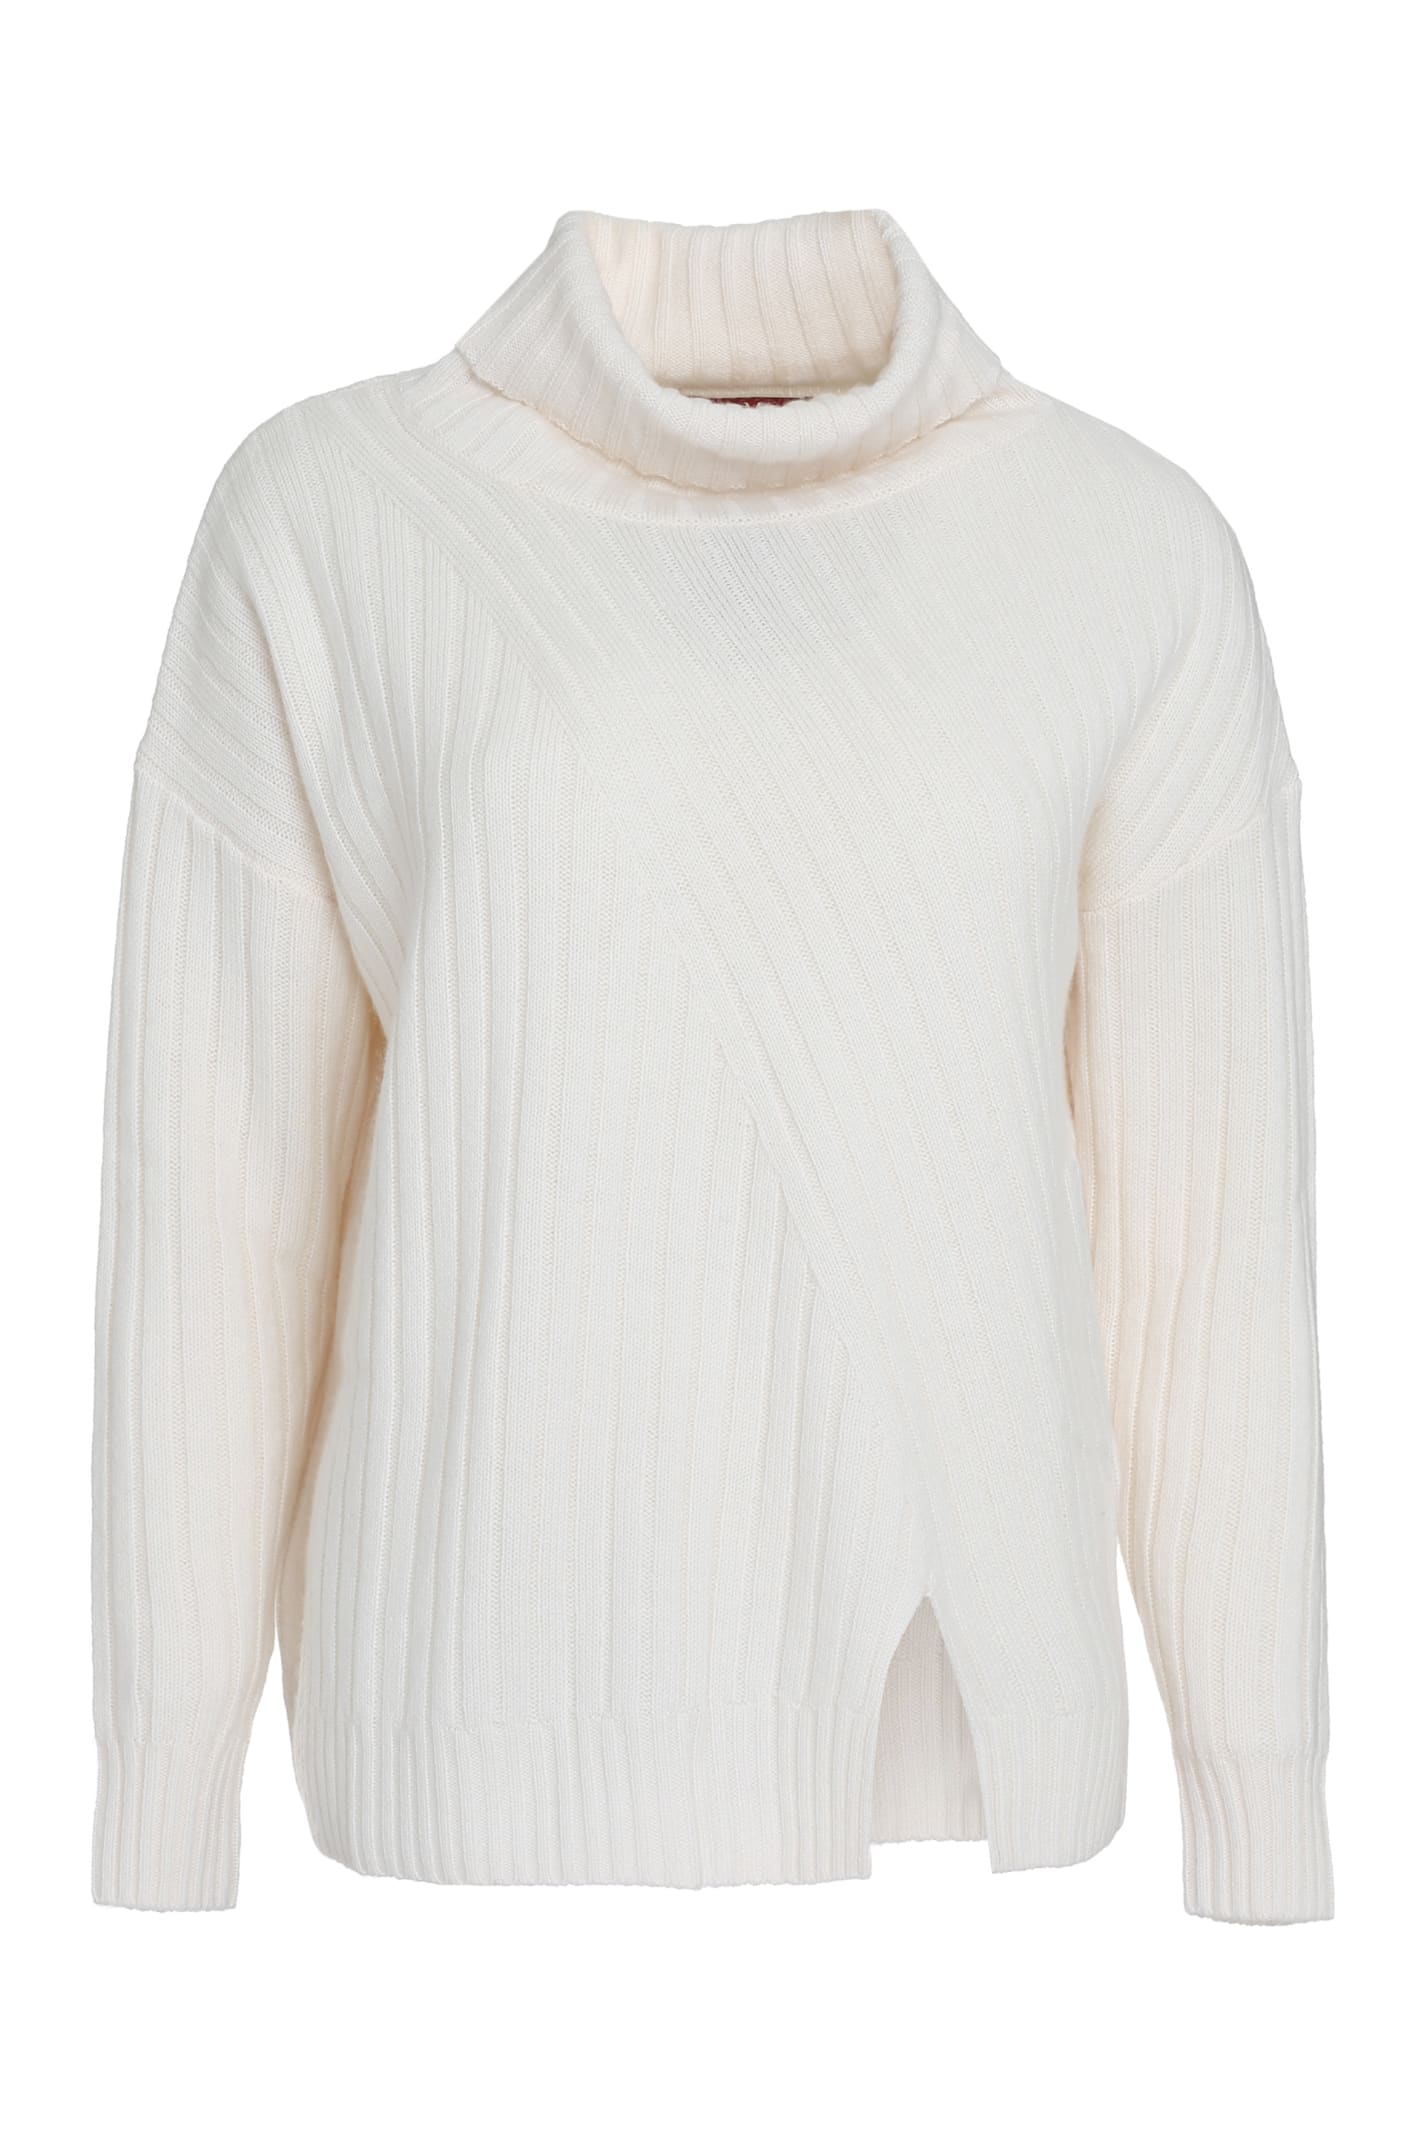 MAX MARA ABILE WOOL AND CASHMERE SWEATER